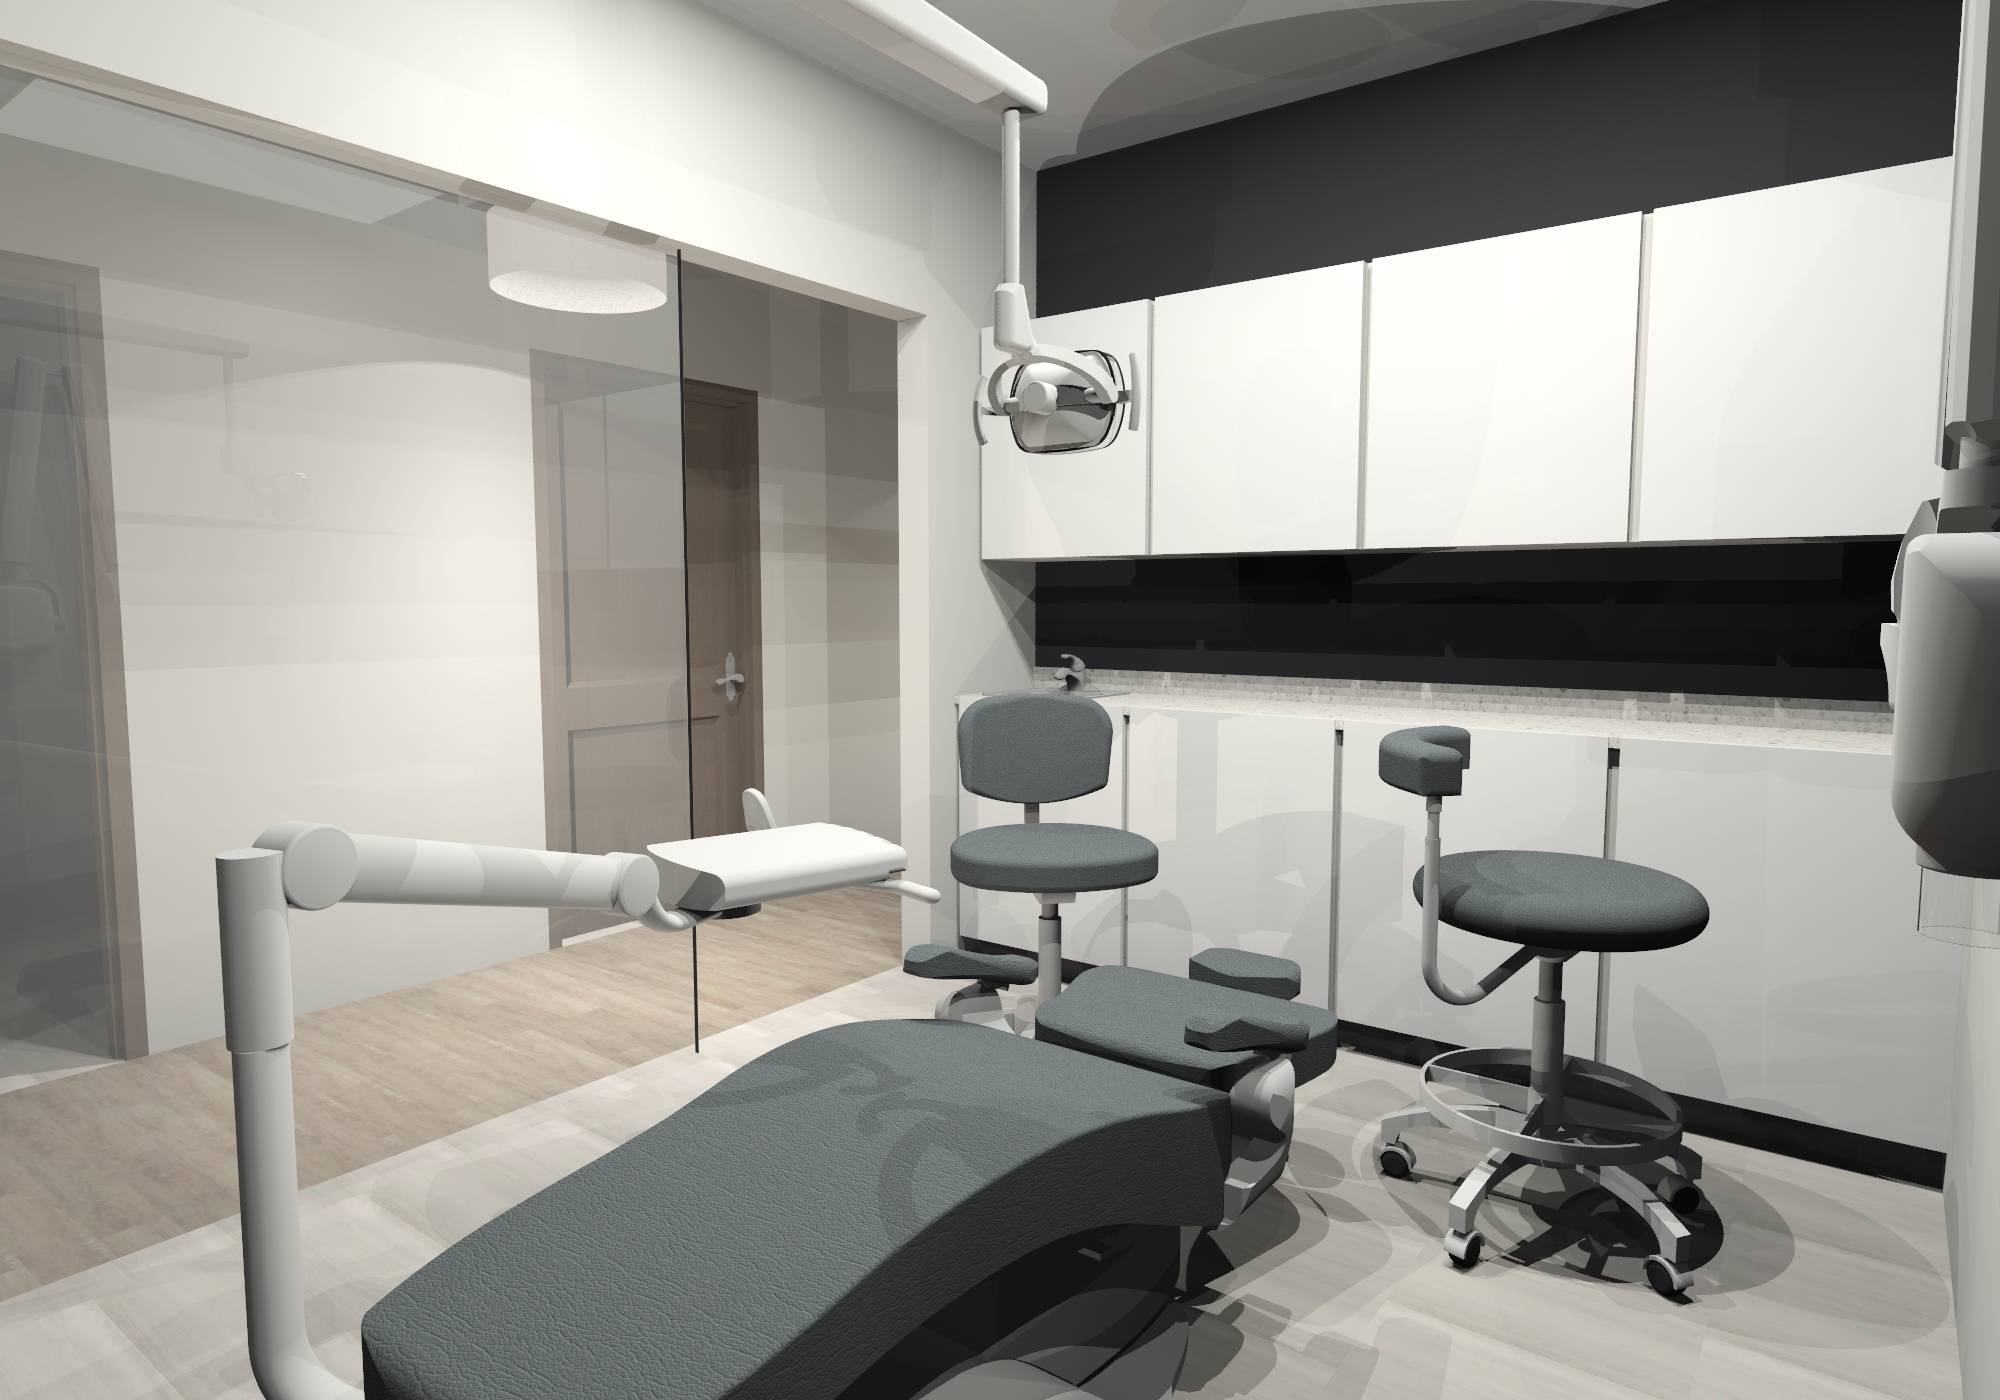 2, 671 SF. Pre built dental office 6 treatment rooms, reception waiting area, and dental imaging sterilization amp ; lab.